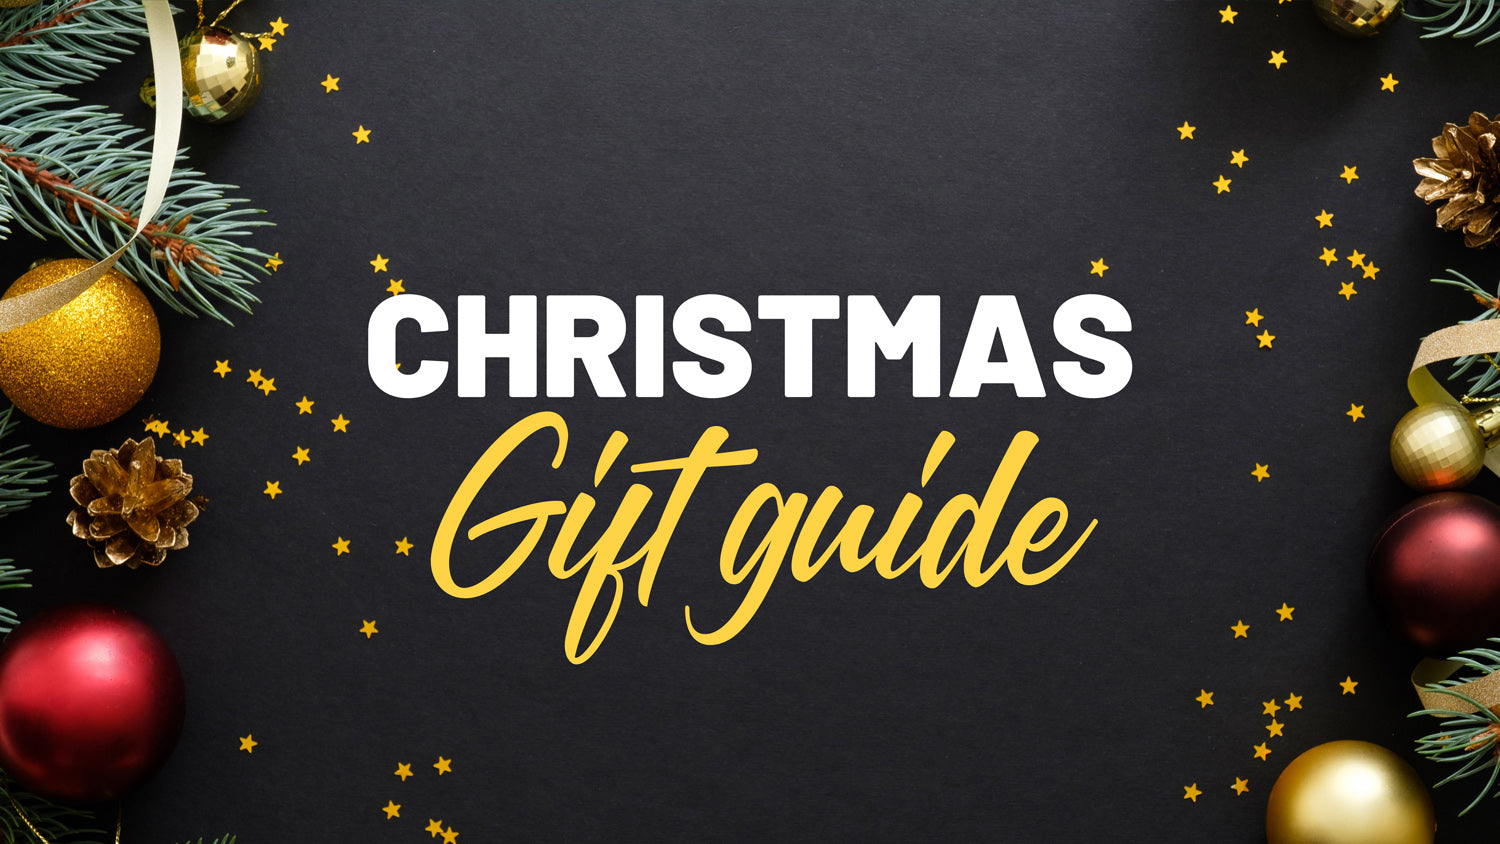 Christmas Gift Guide from TF 🎄 - TF Tools Ltd